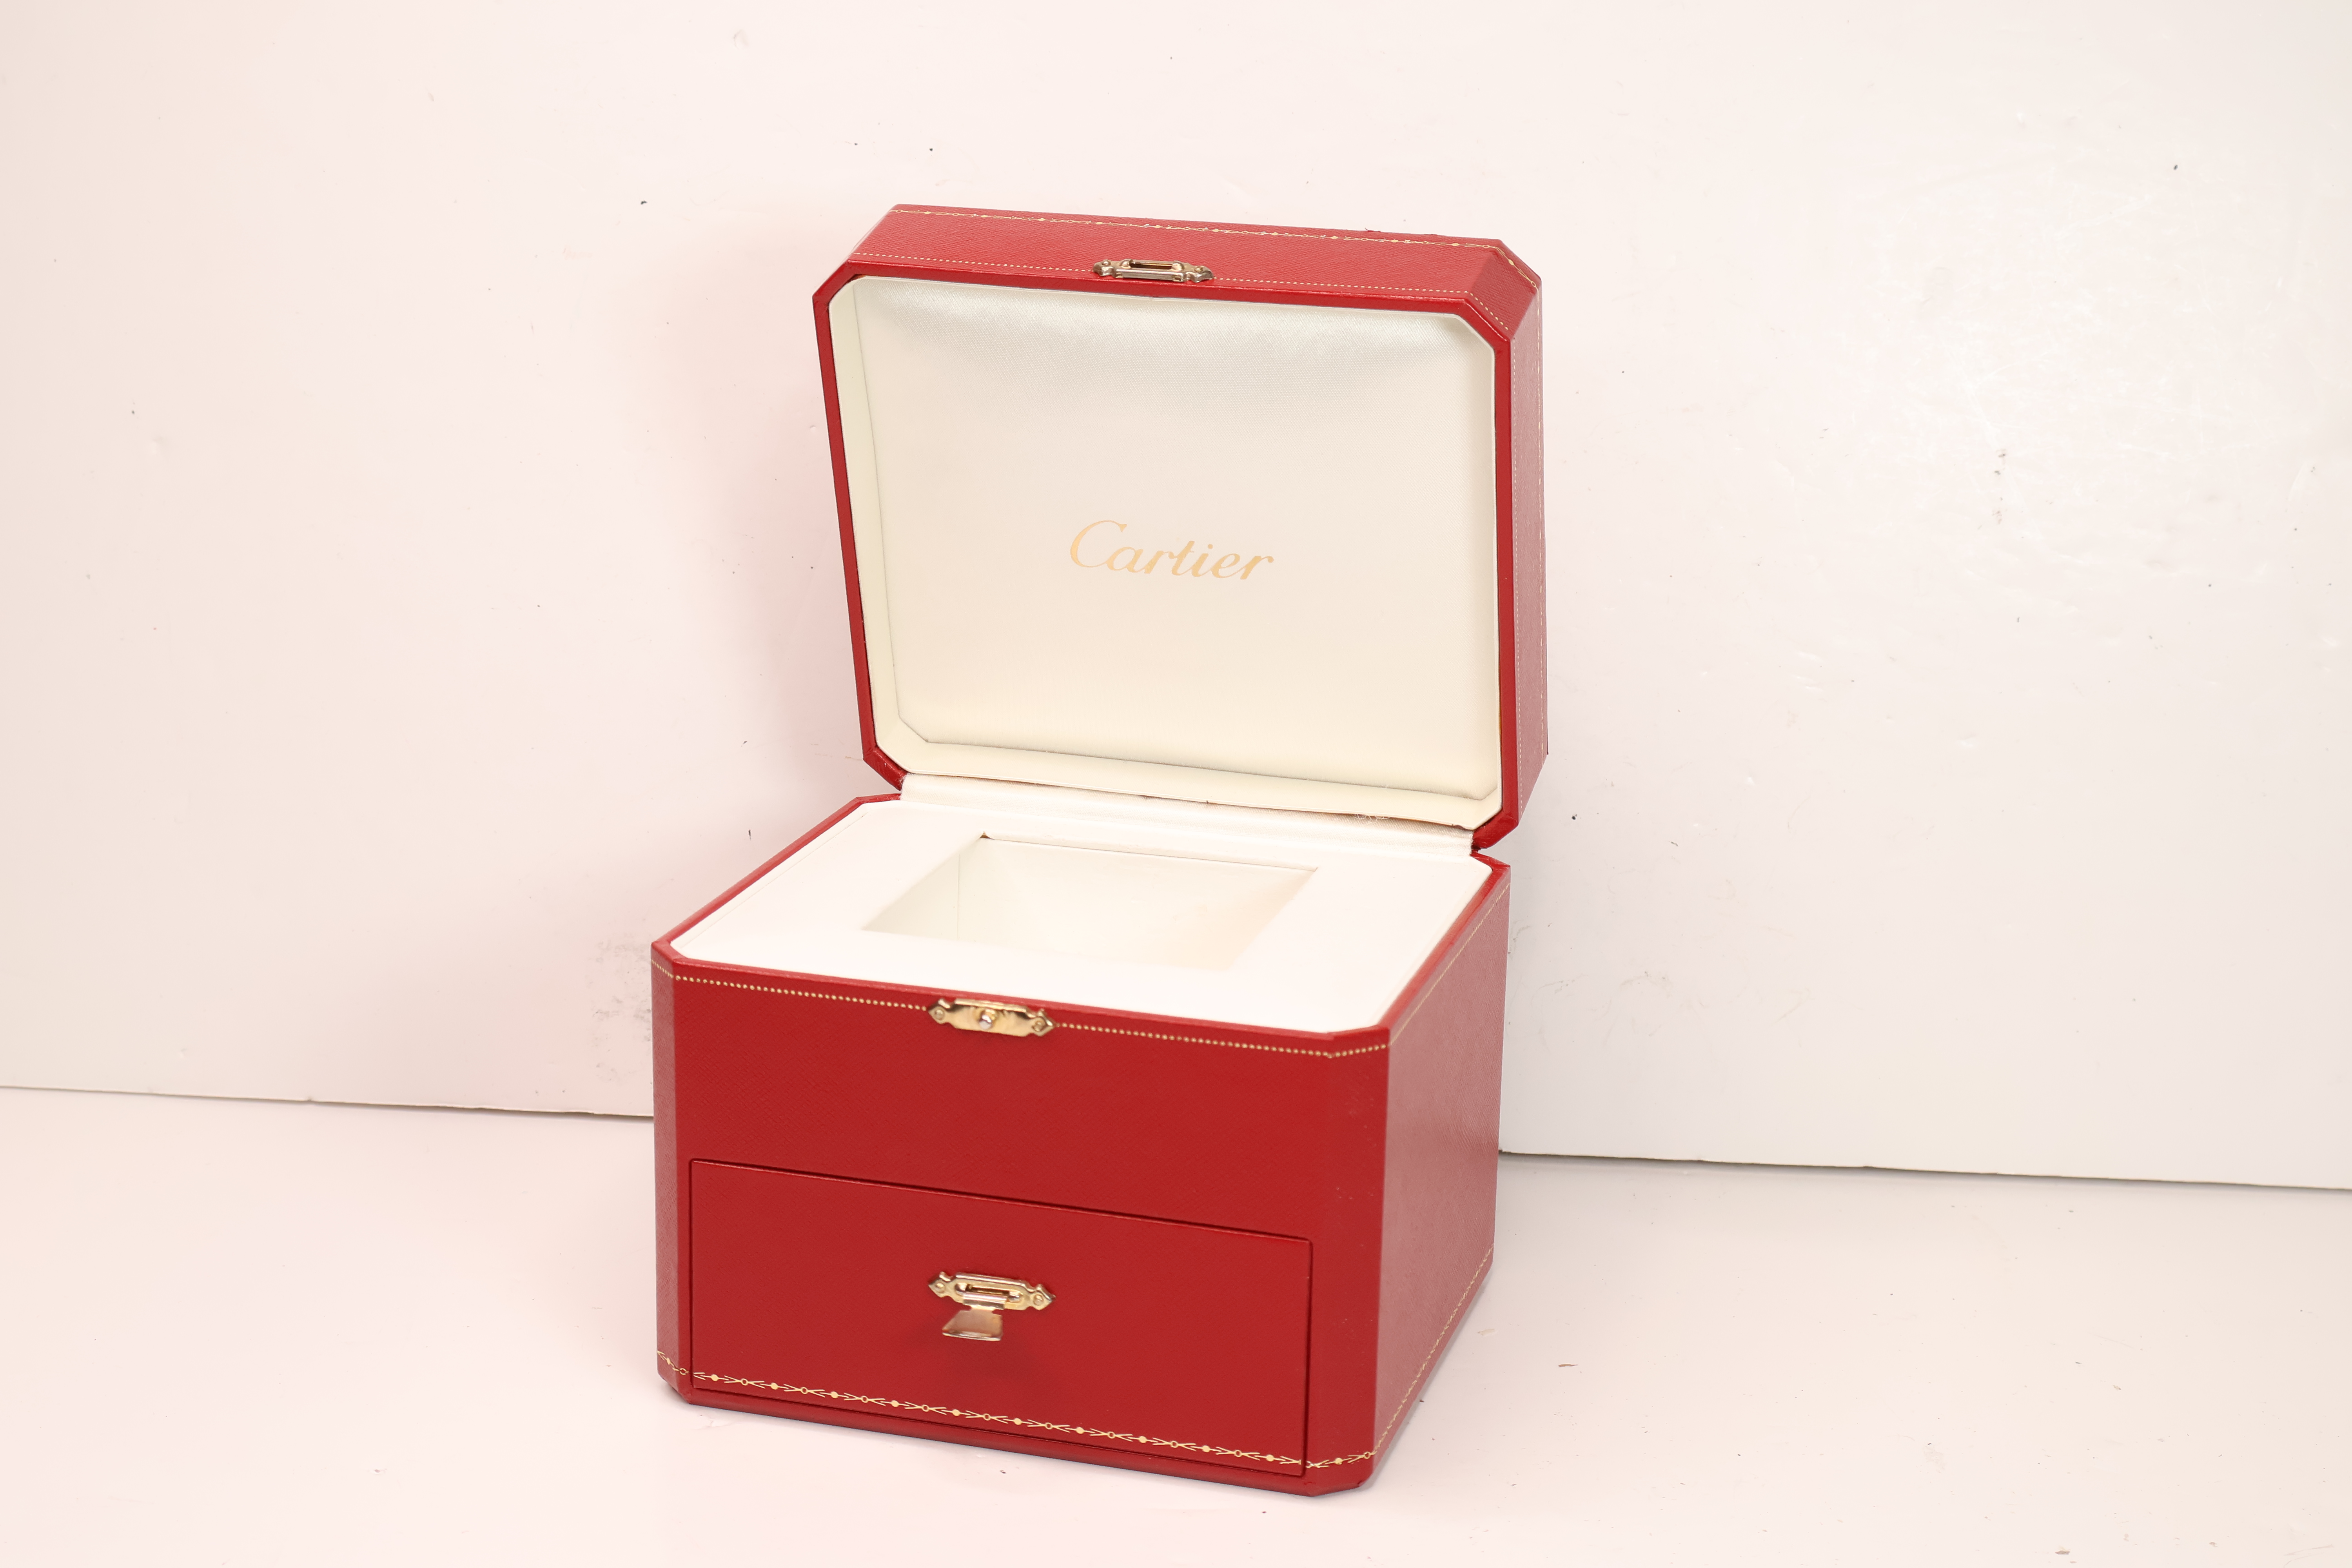 *To Be Sold Without Reserve* Cartier Watch Box, with draw, missing cushion, clasp A/F - Image 4 of 4